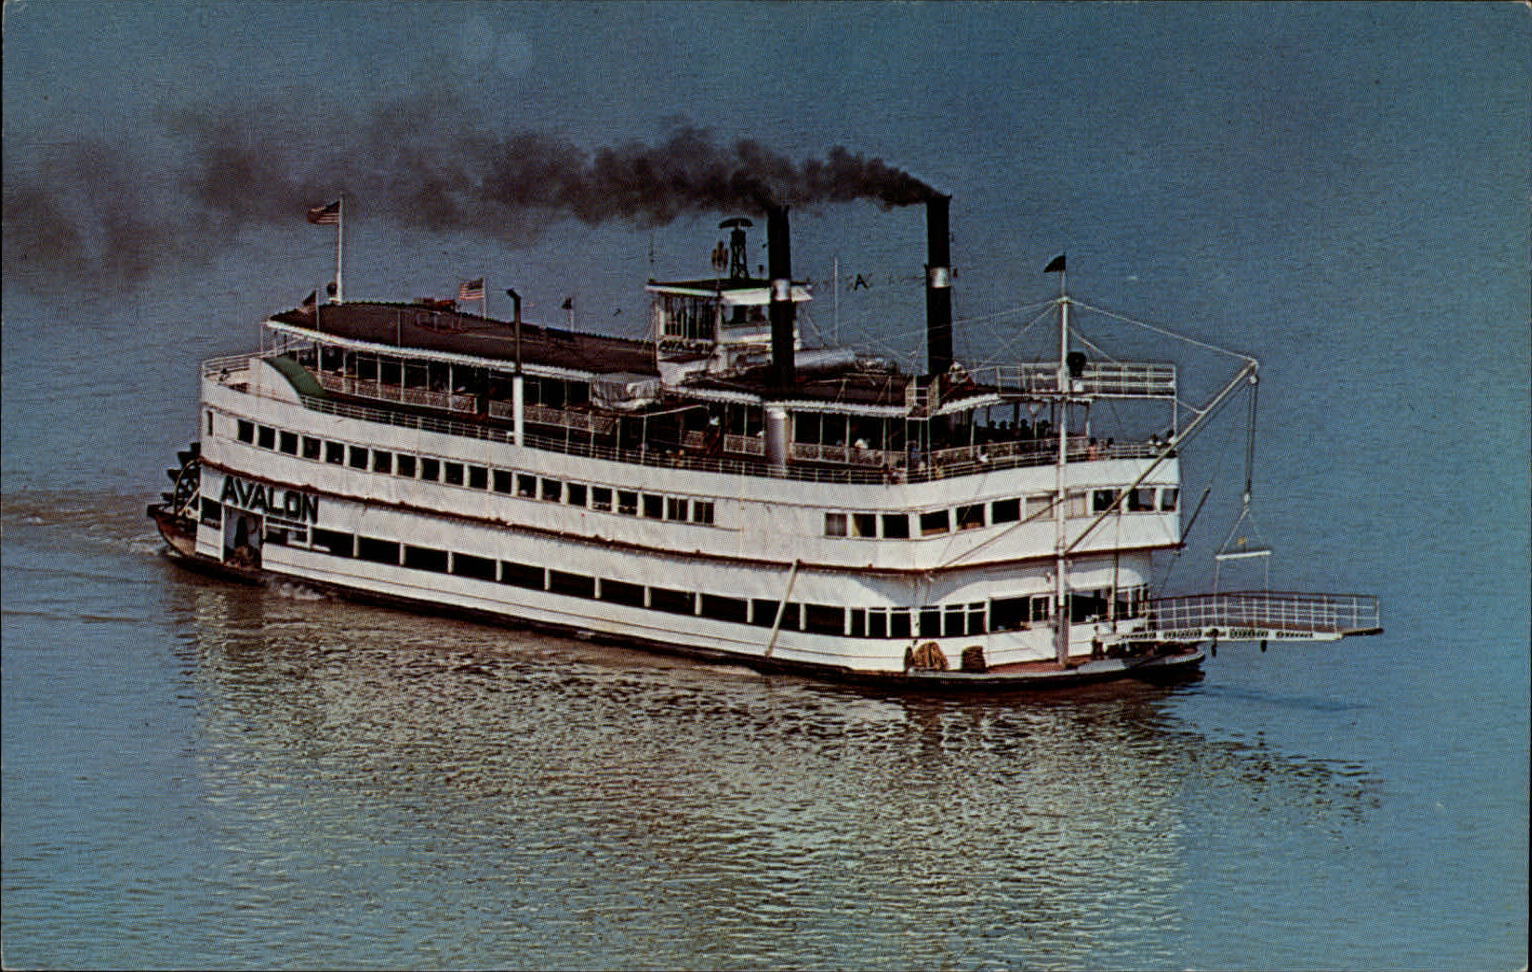 Avalon Steamboat river mailed 1963 Valley Grove West Virginia to S Herring